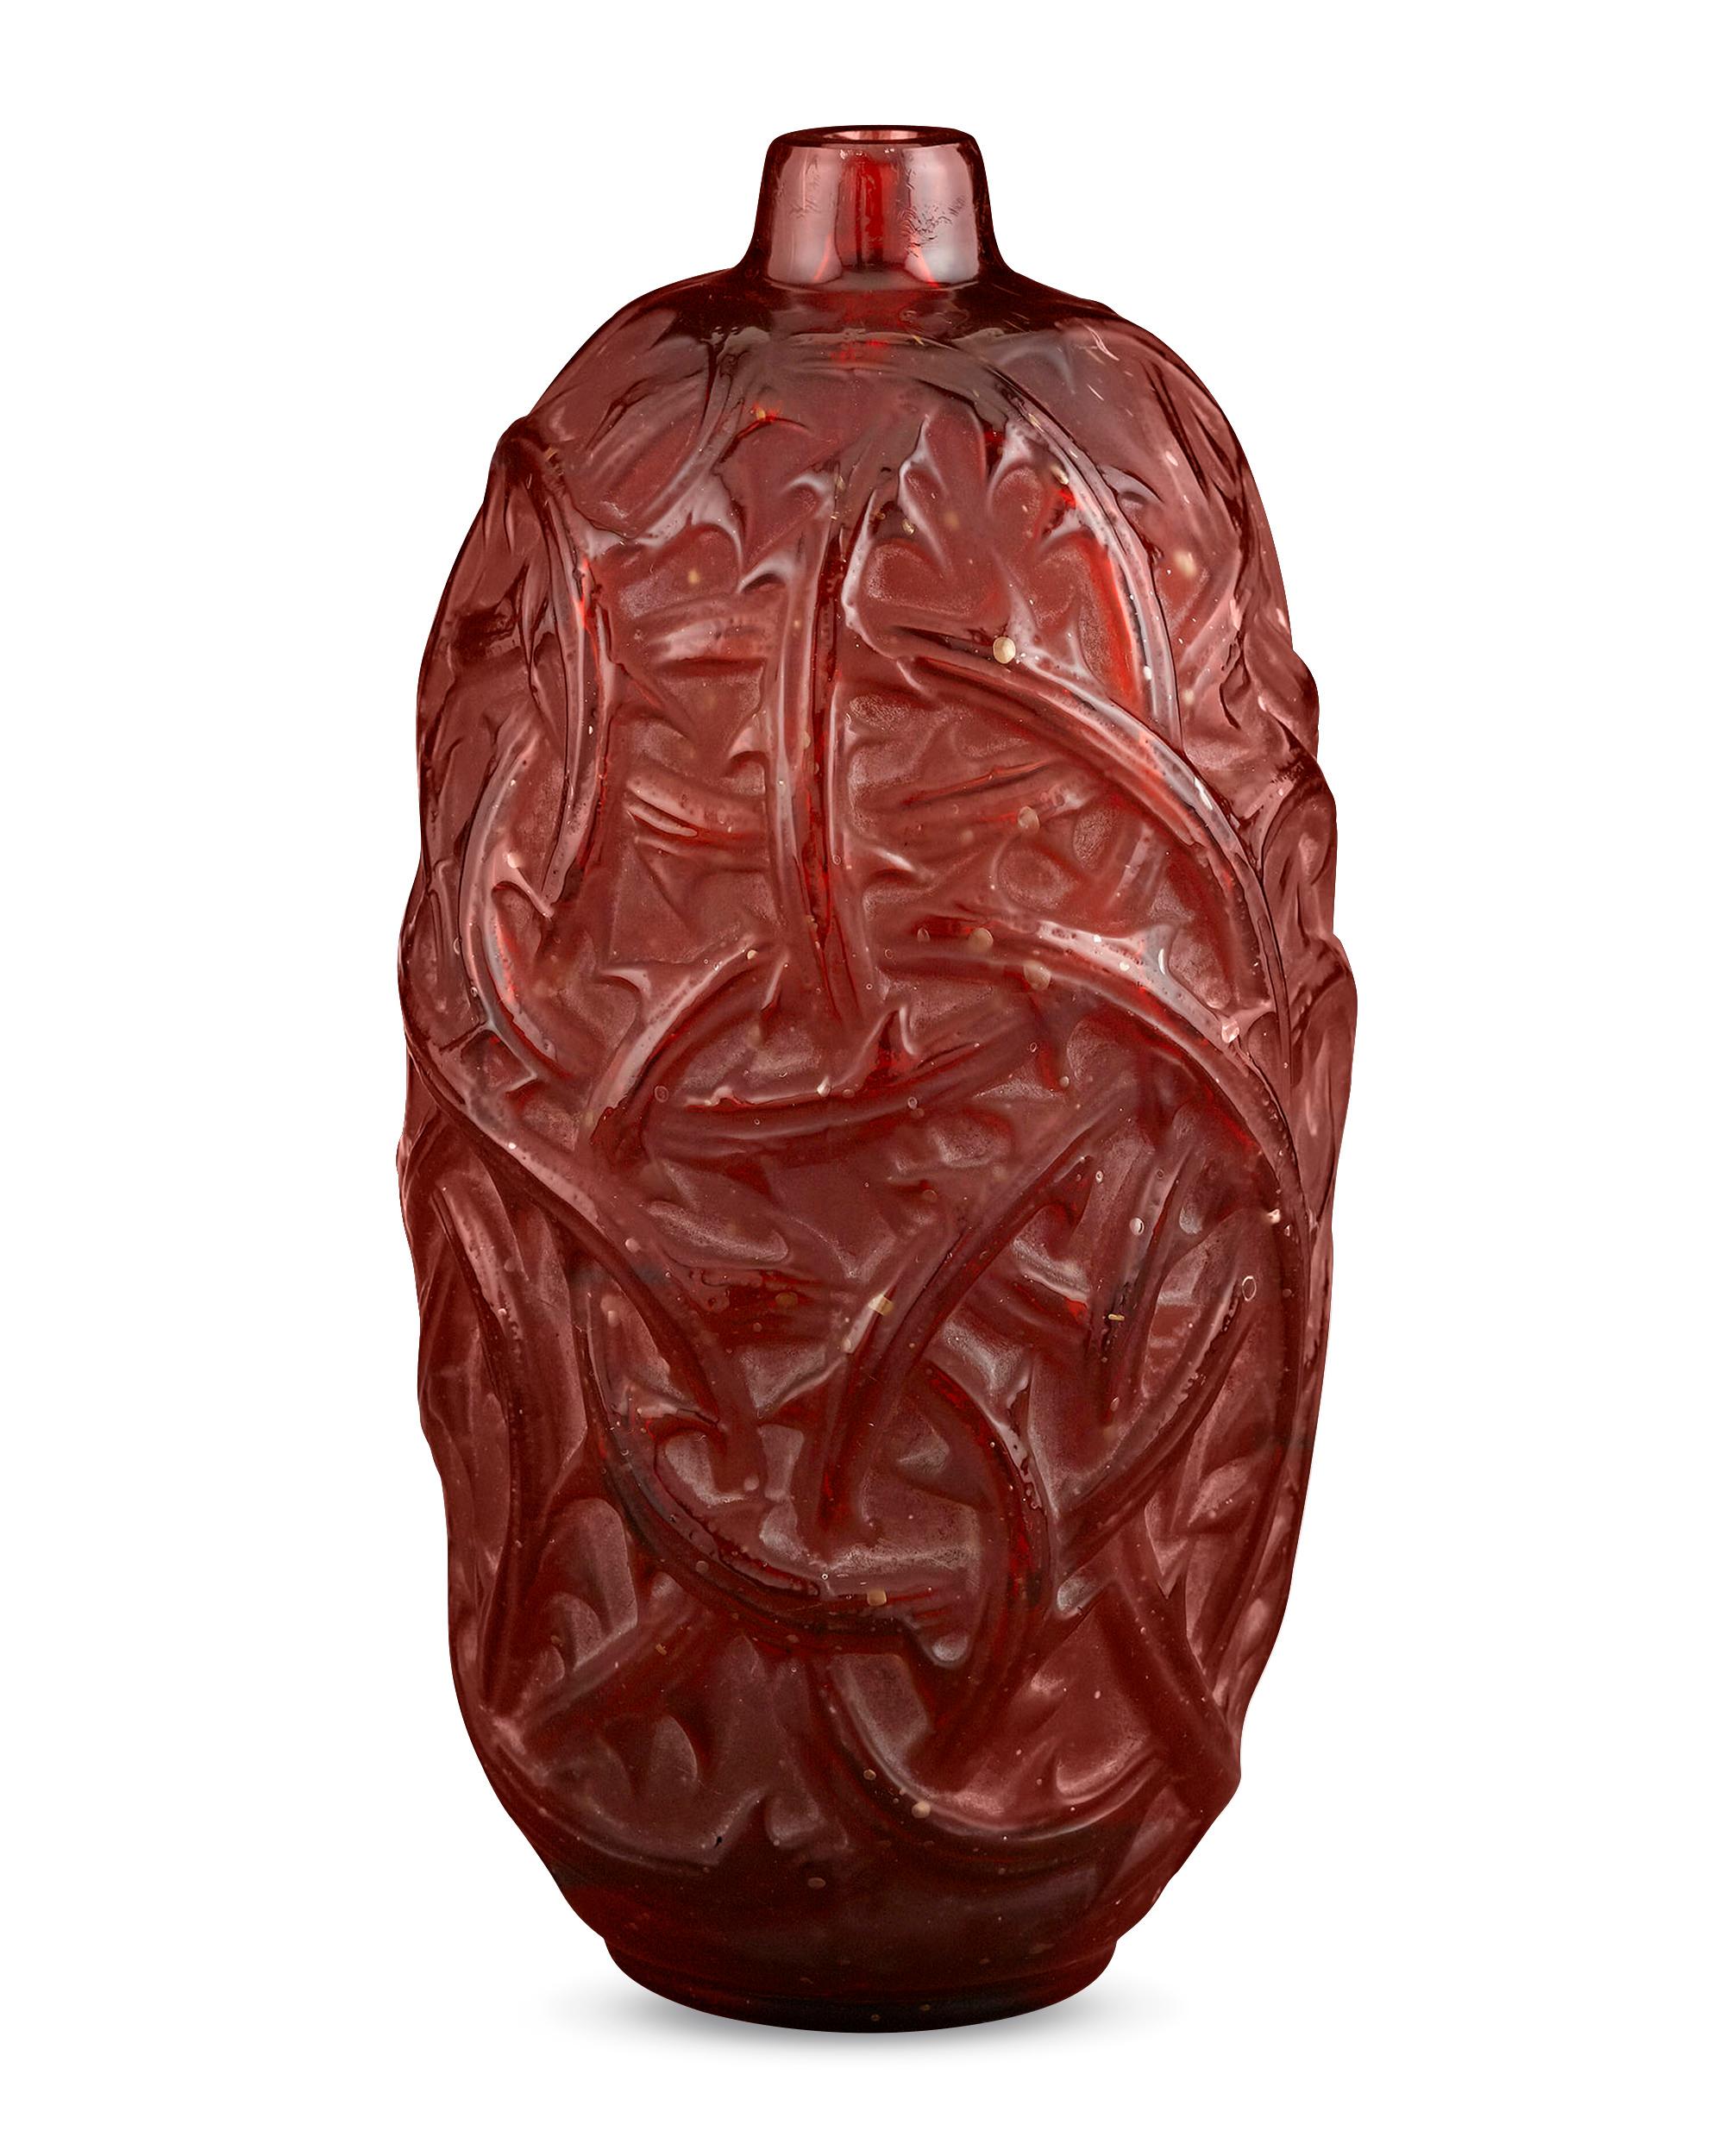 Thorned briars engulf this resplendent crimson art glass vase by the legendary René Lalique. Entitled “Ronces”, the polished vines provide a vibrant contrast to the frosted body they envelope. Originally designed for perfumer François Coty, the